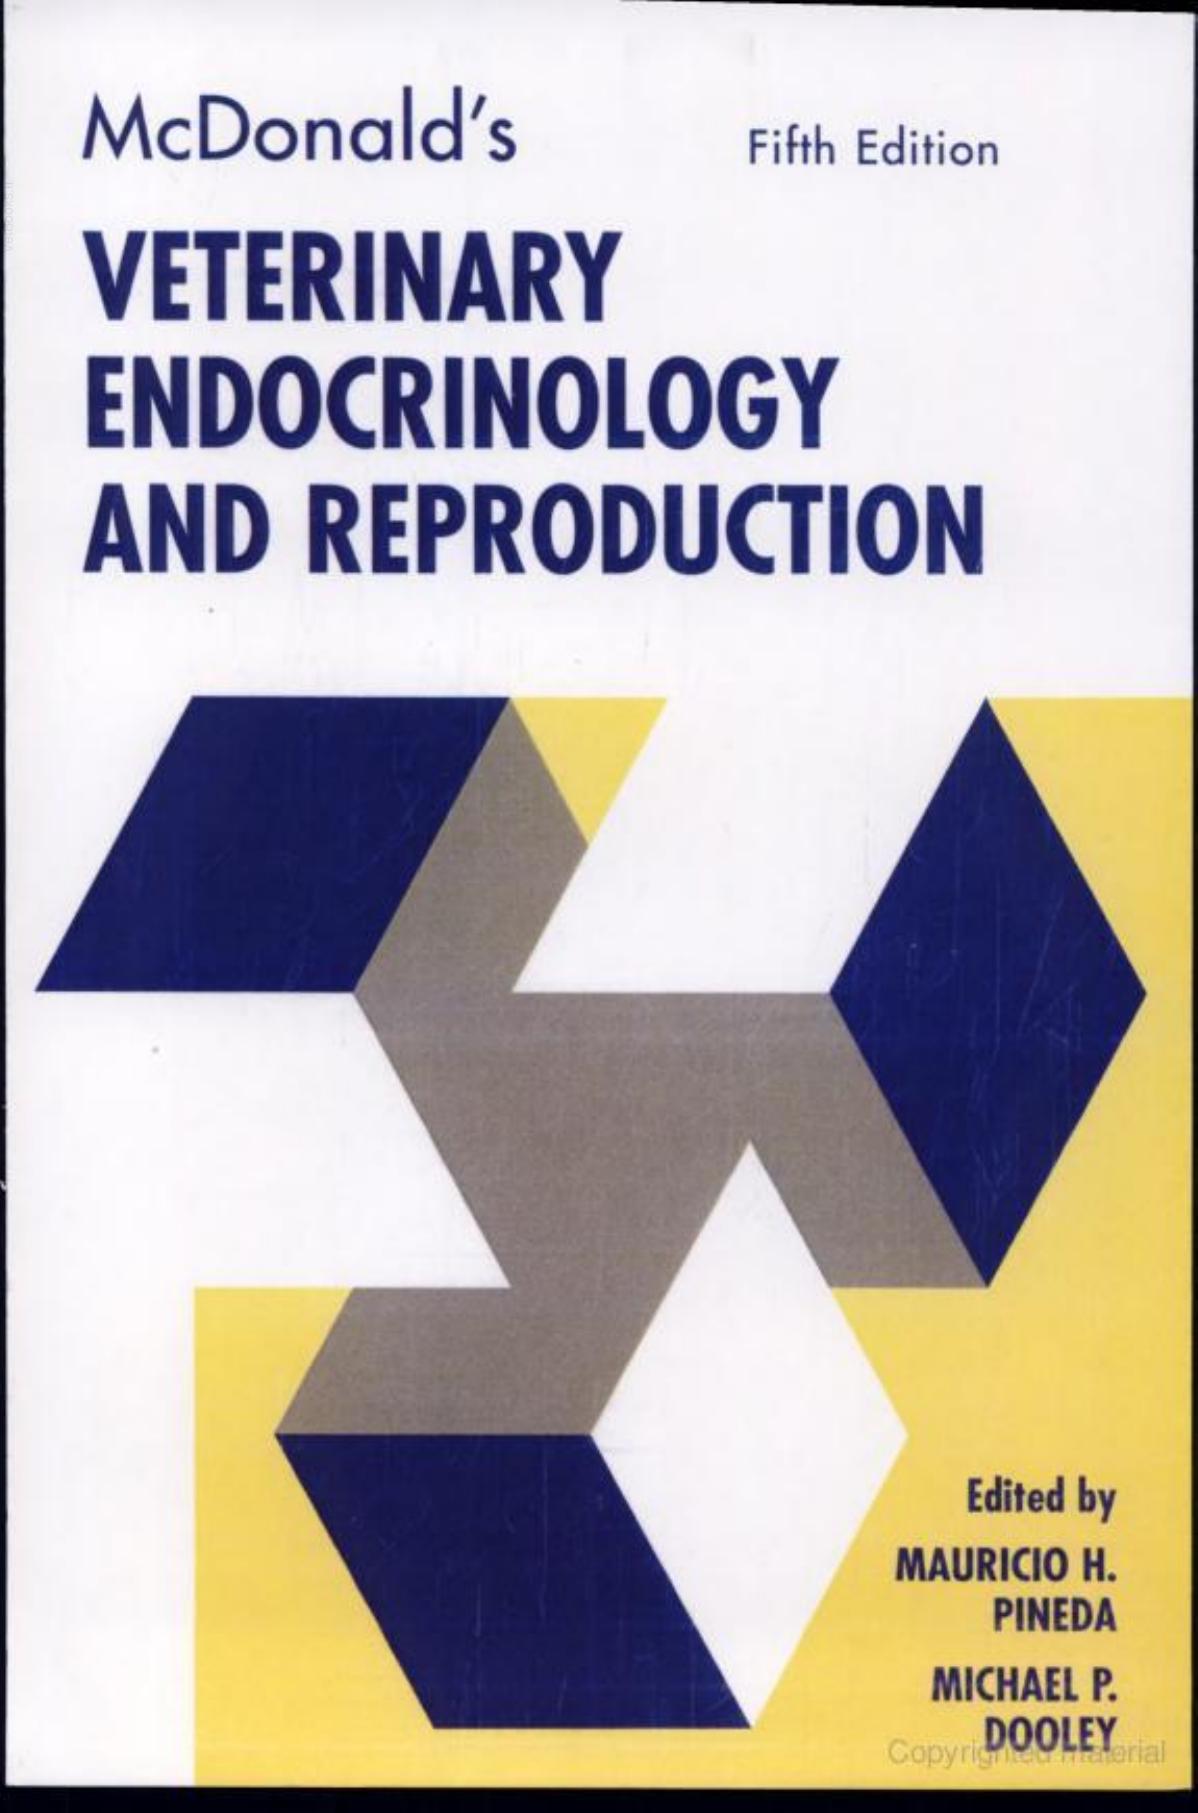 McDonald's Veterinary Endocrinology and Reproduction, 5th Edition (Incomplete)